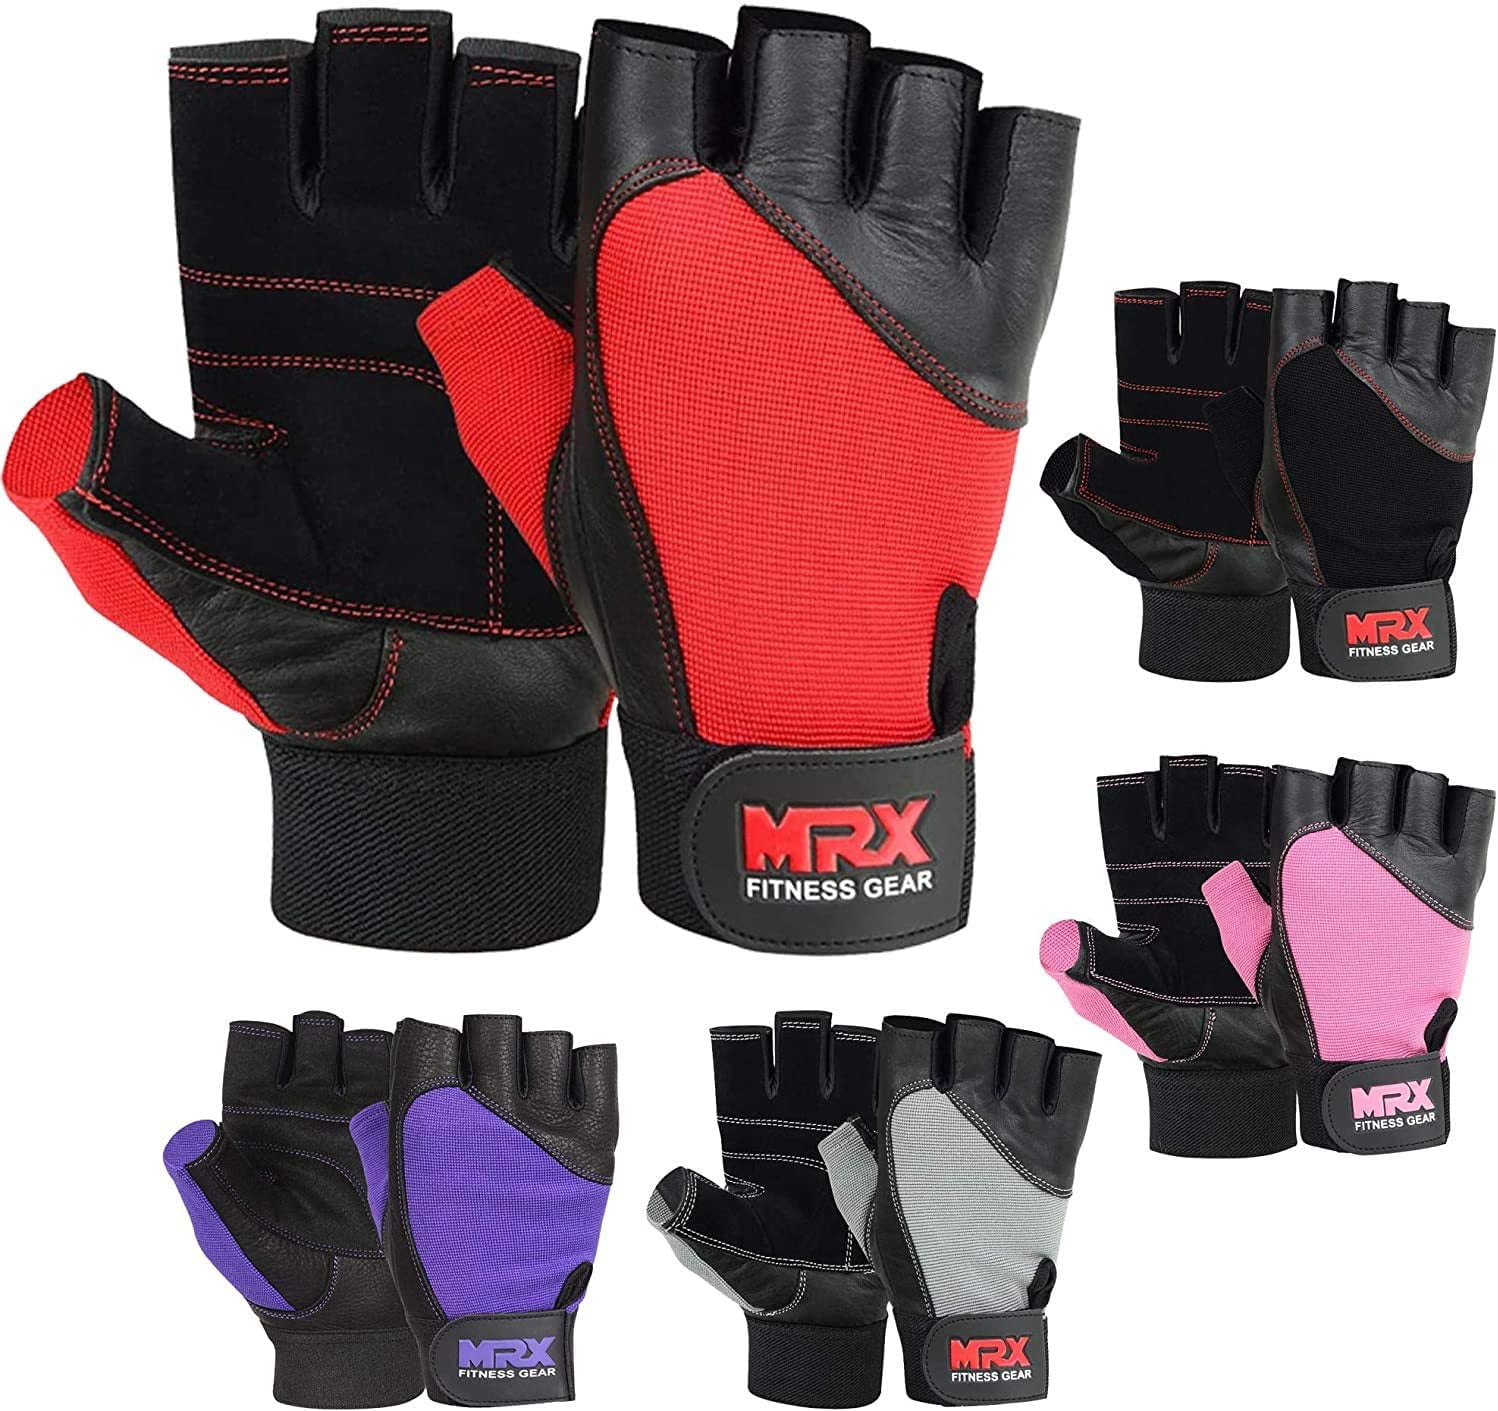 GYM FITNESS GLOVES WOMEN WEIGHT LIFTING BODYBUILDING TRAINING WORKOUT